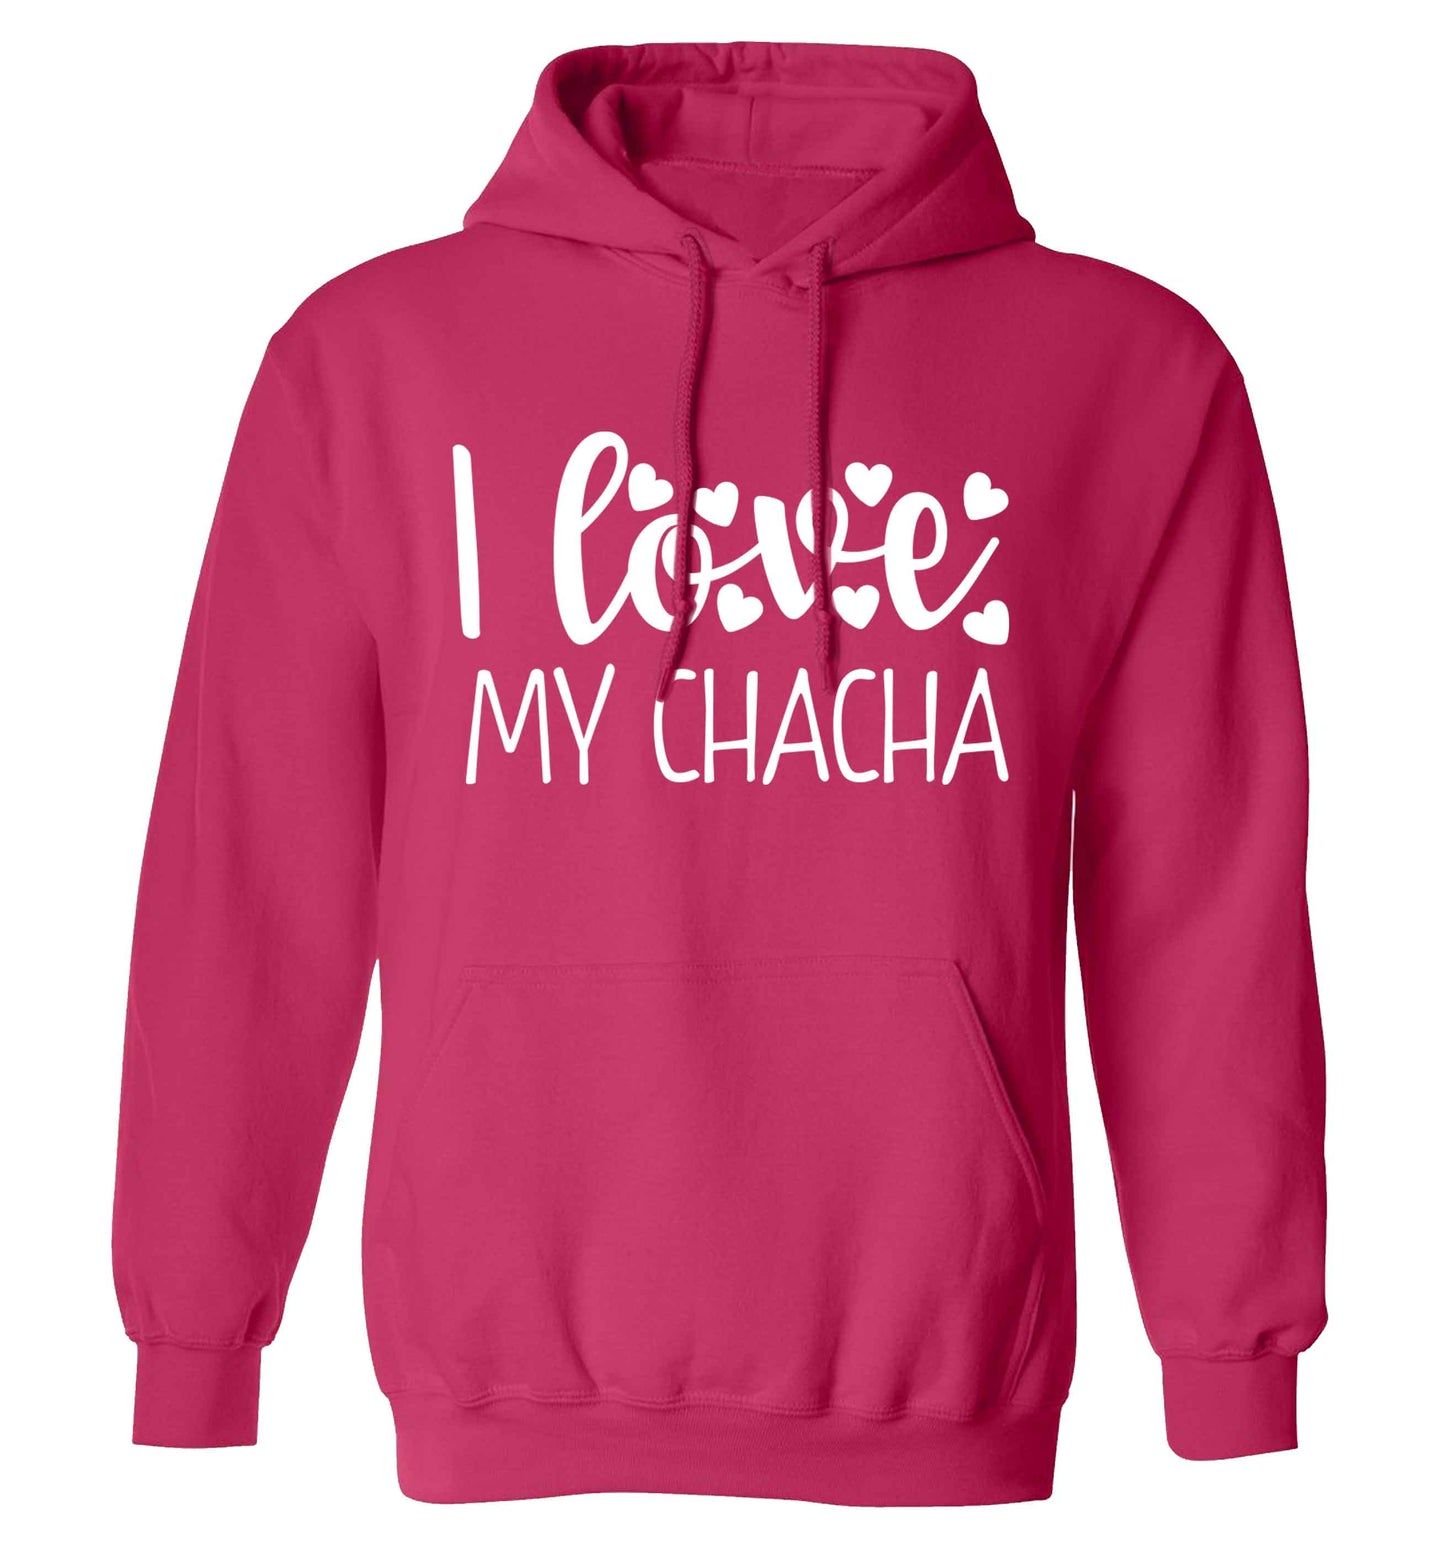 I love my chacha adults unisex pink hoodie 2XL